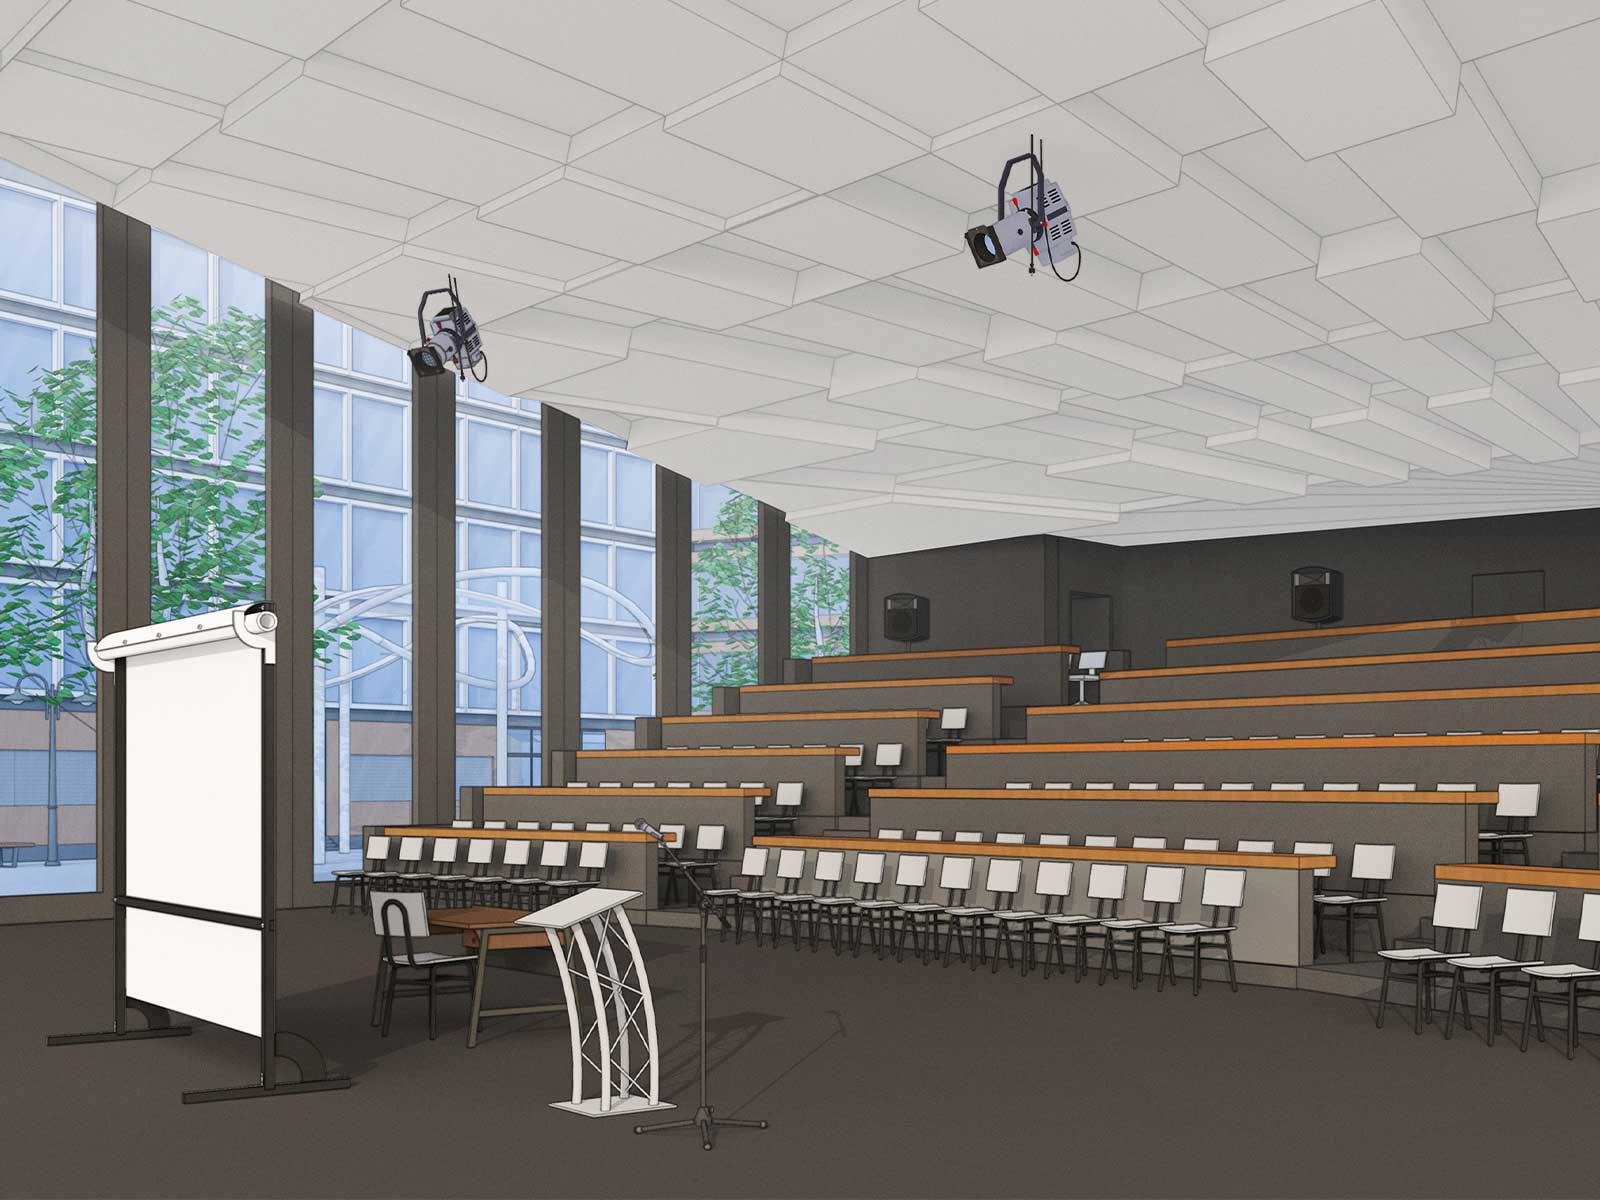 SketchUp for Higher Education